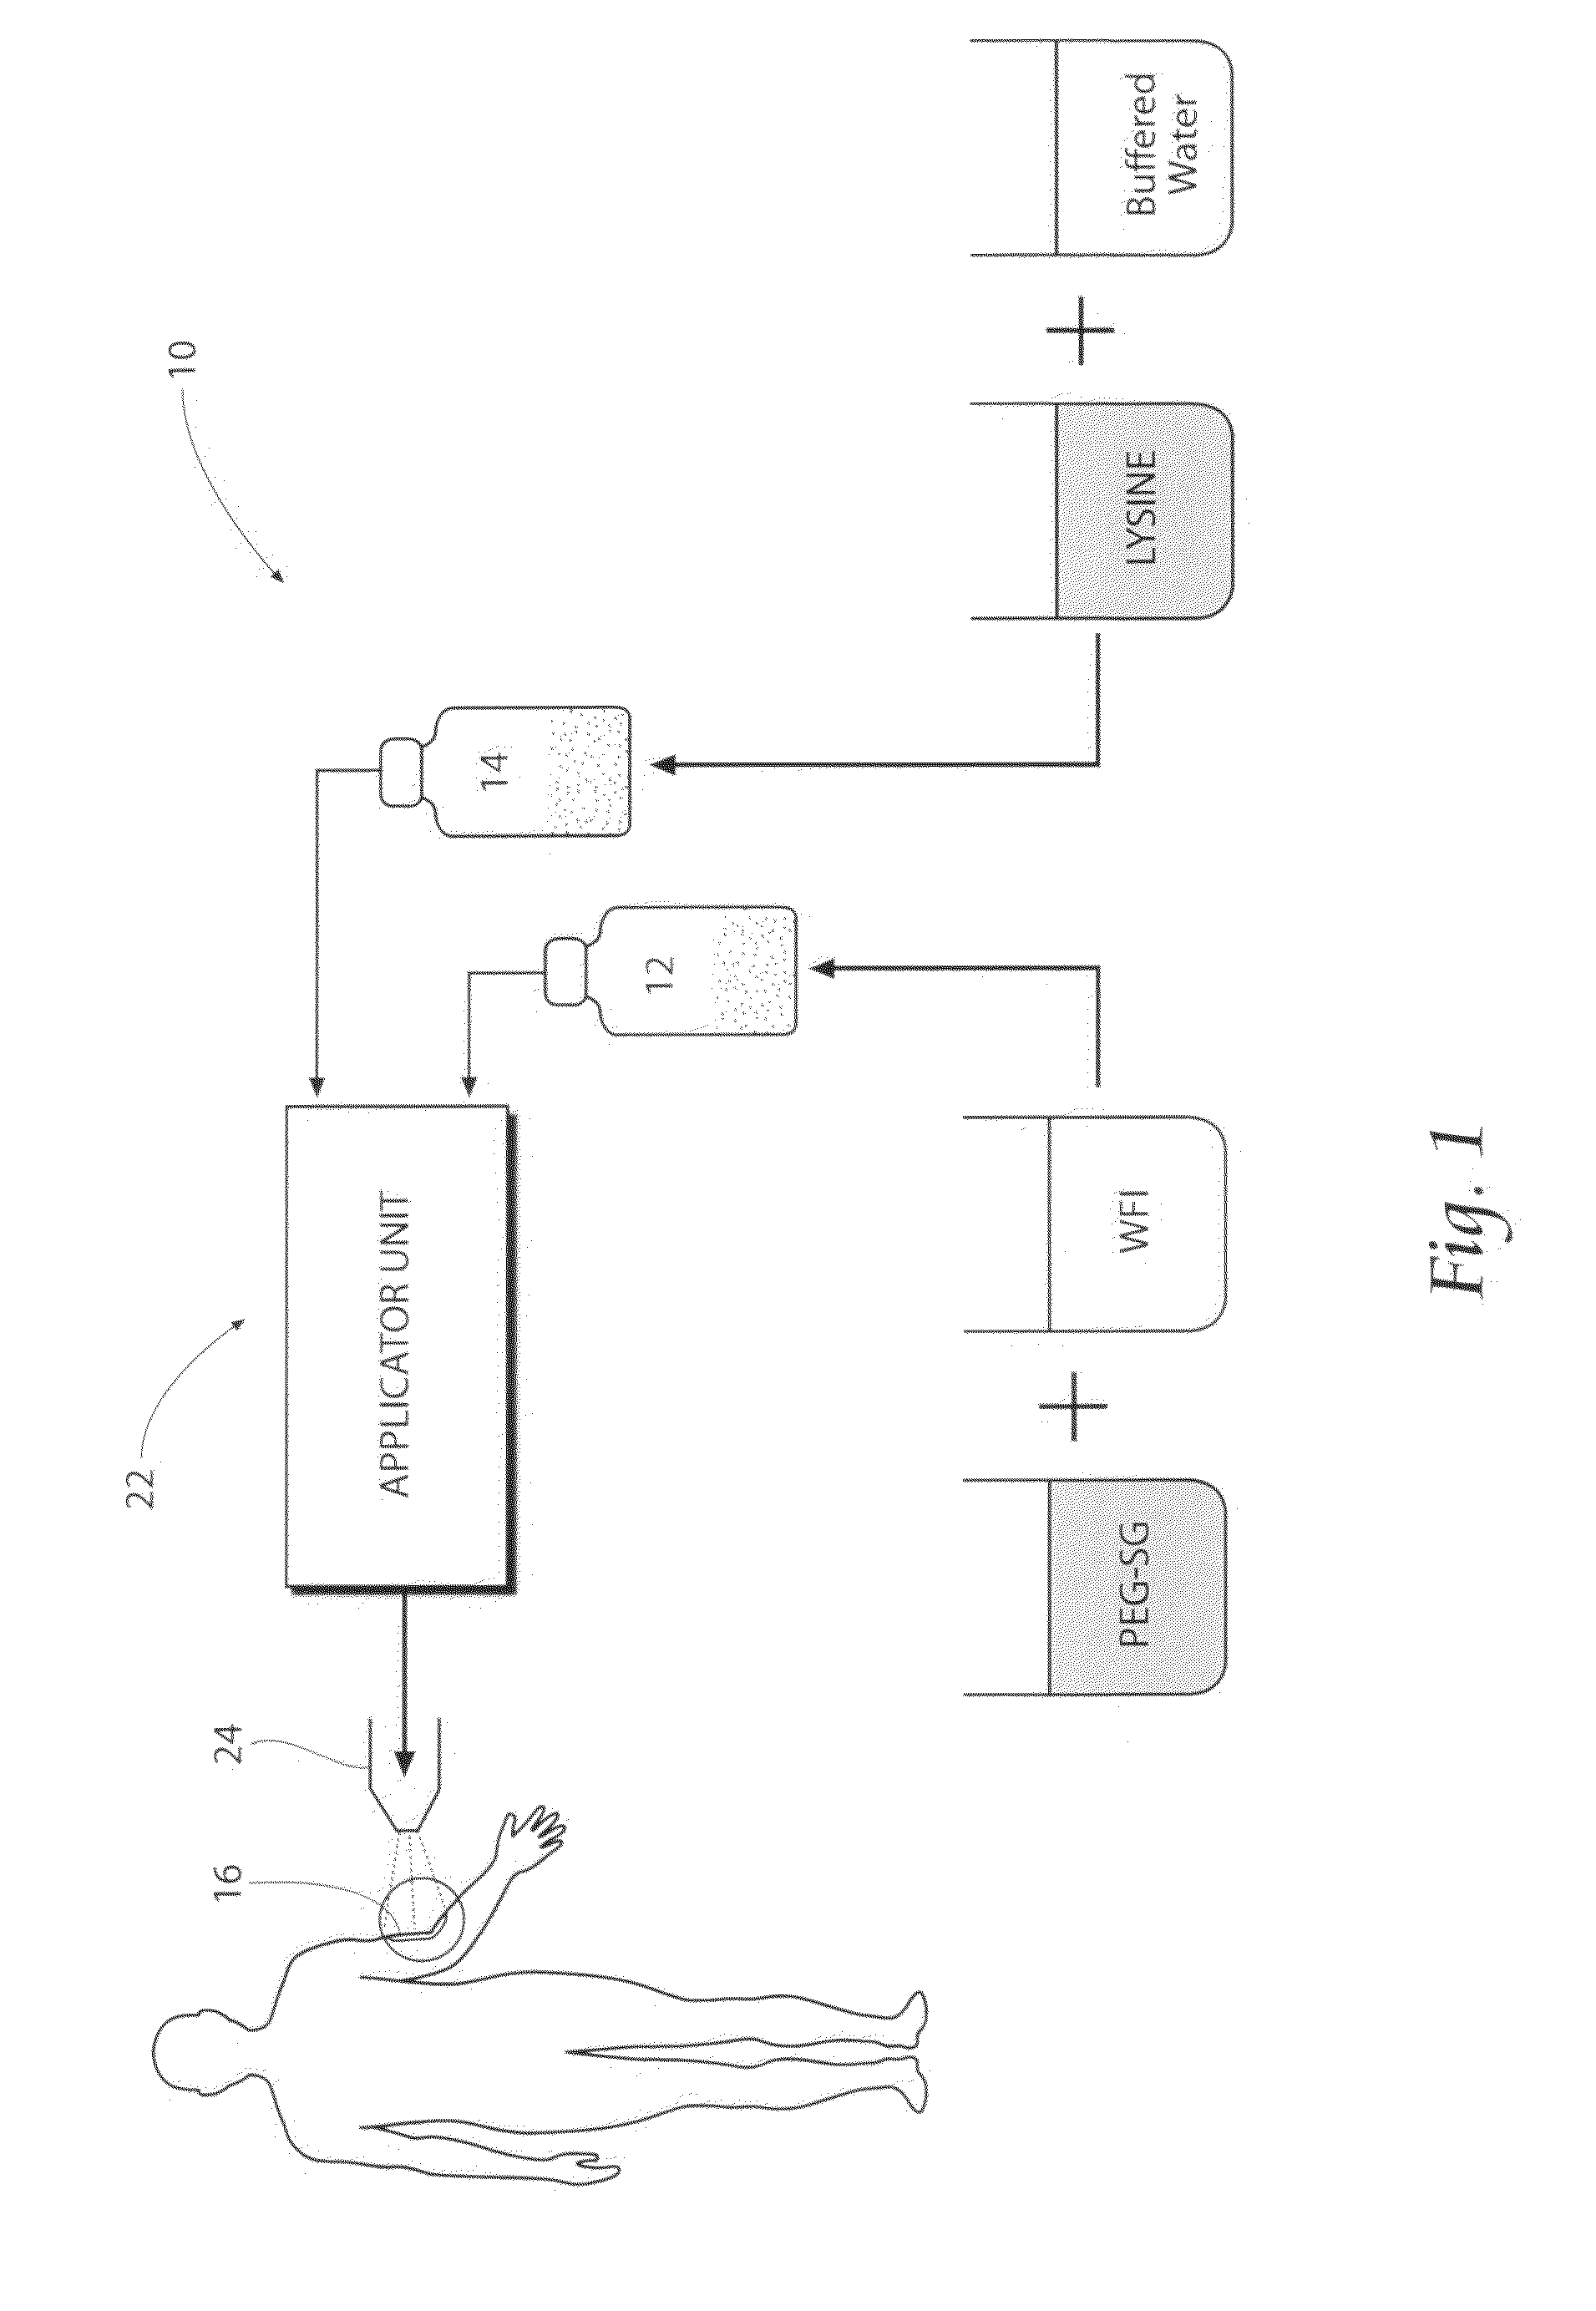 Wound treatment systems, devices, and methods using biocompatible synthetic hydrogel compositions